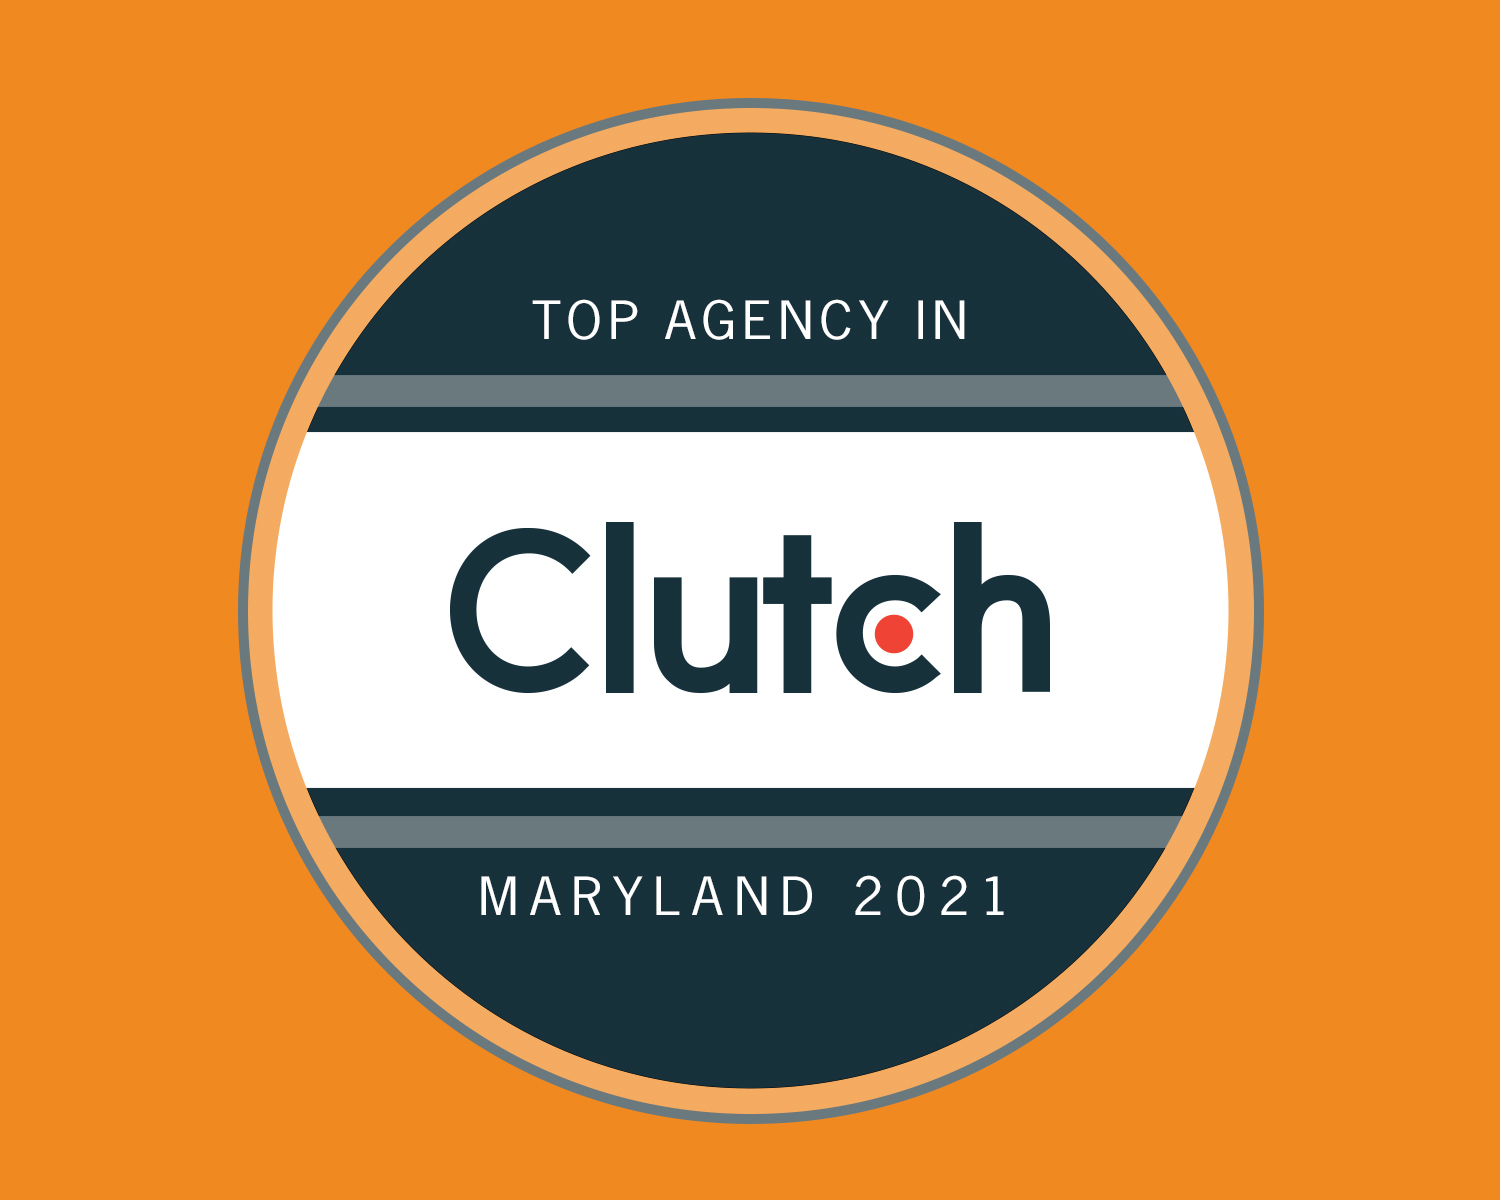 Top Agency in Maryland 2021